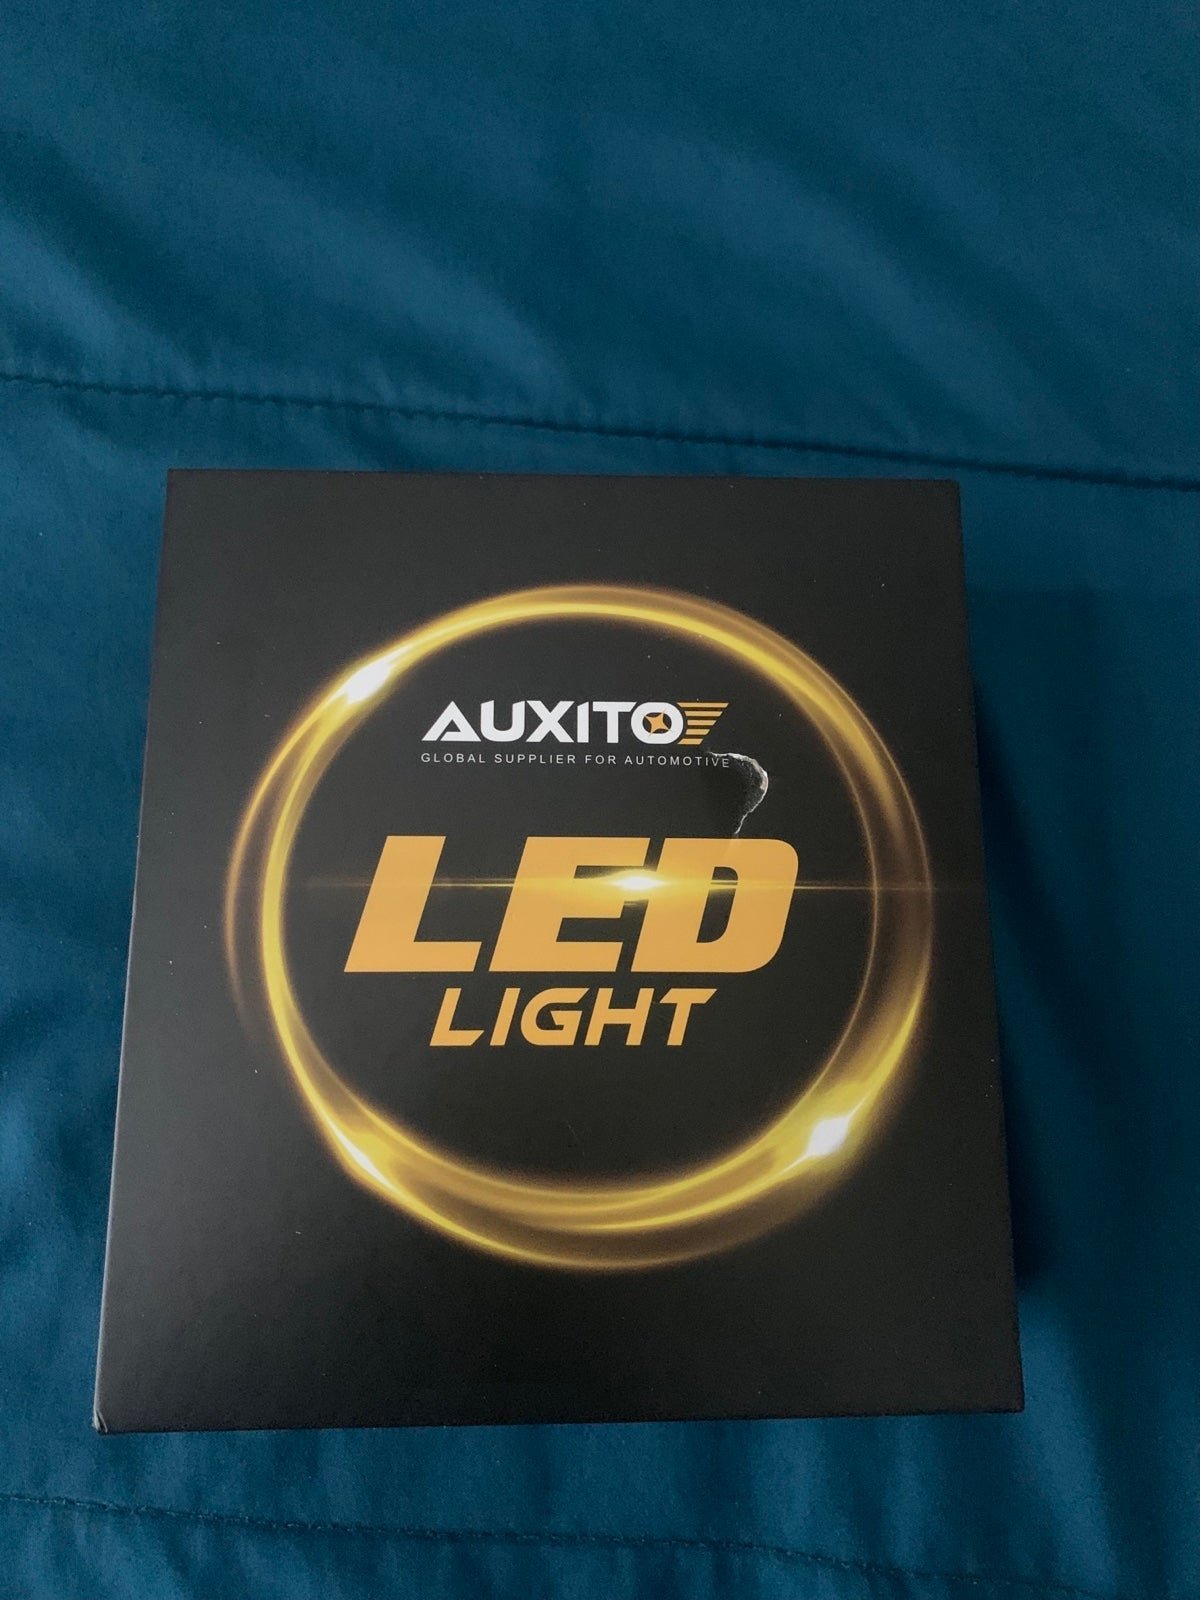 Auxito Low & High Beam LED Headlight Bulb Kit 22RbFcHCP